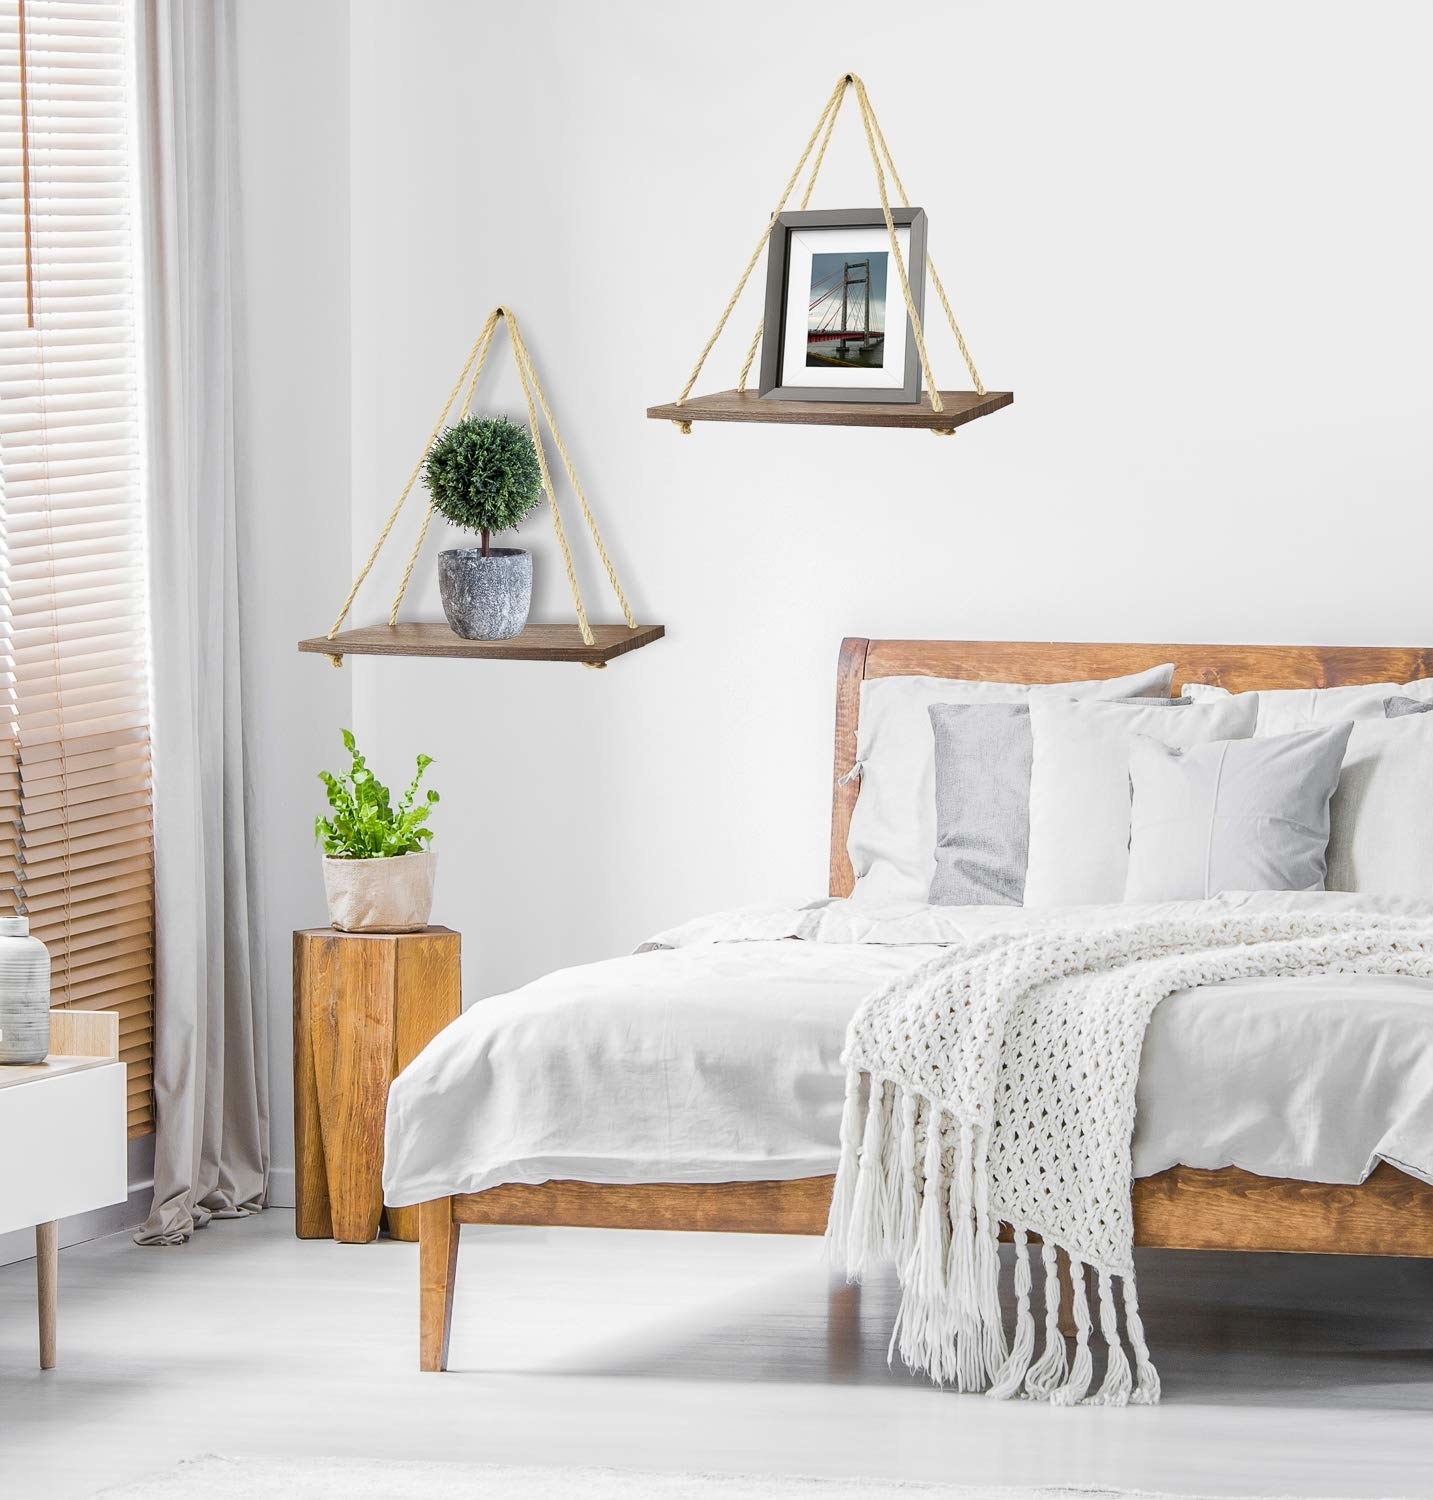 36 Things To Make Your Apartment Look More Put Together On The Cheap